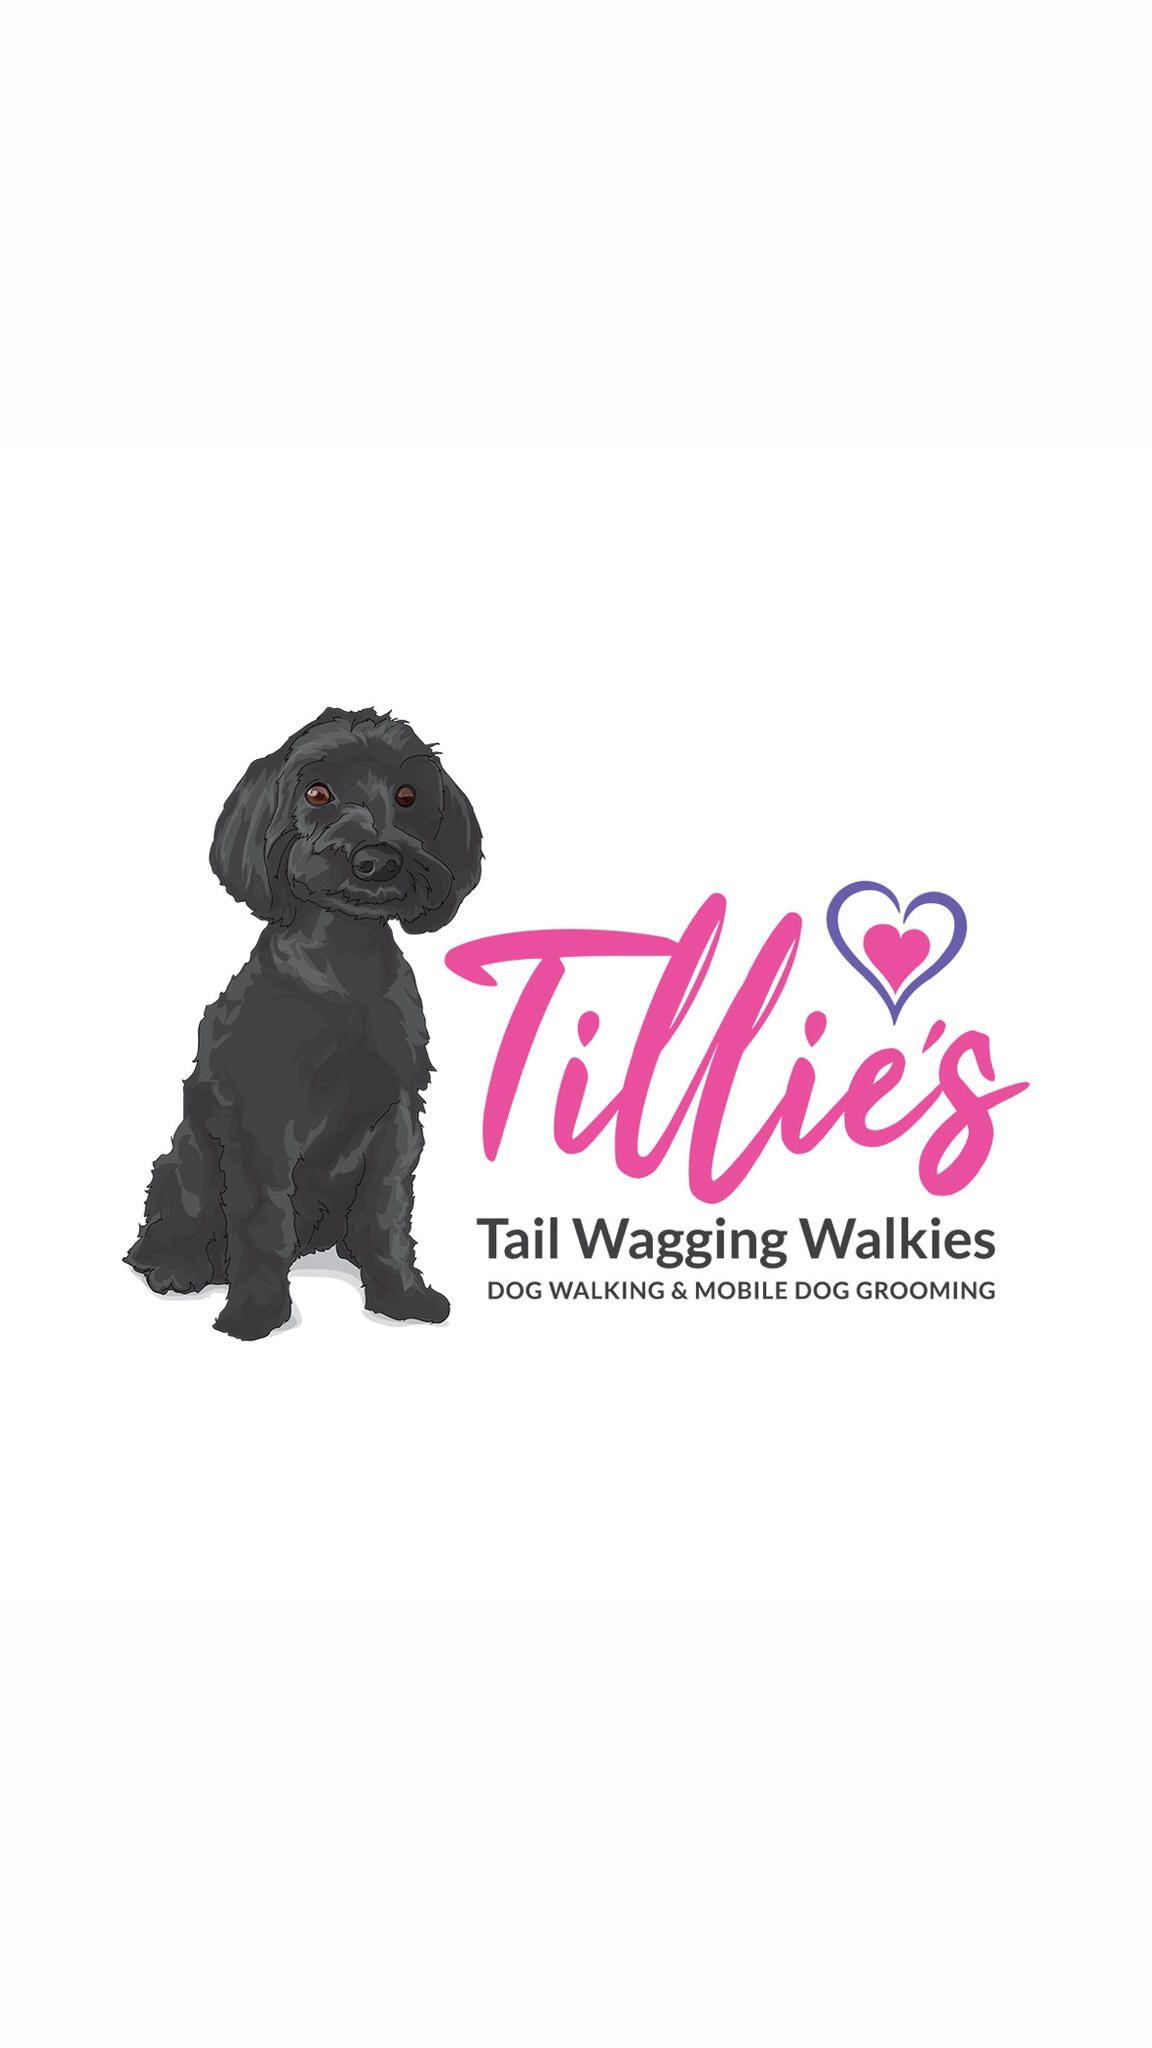 Tillie’s Tail Wagging Walkies & Mobile Dog Grooming 2